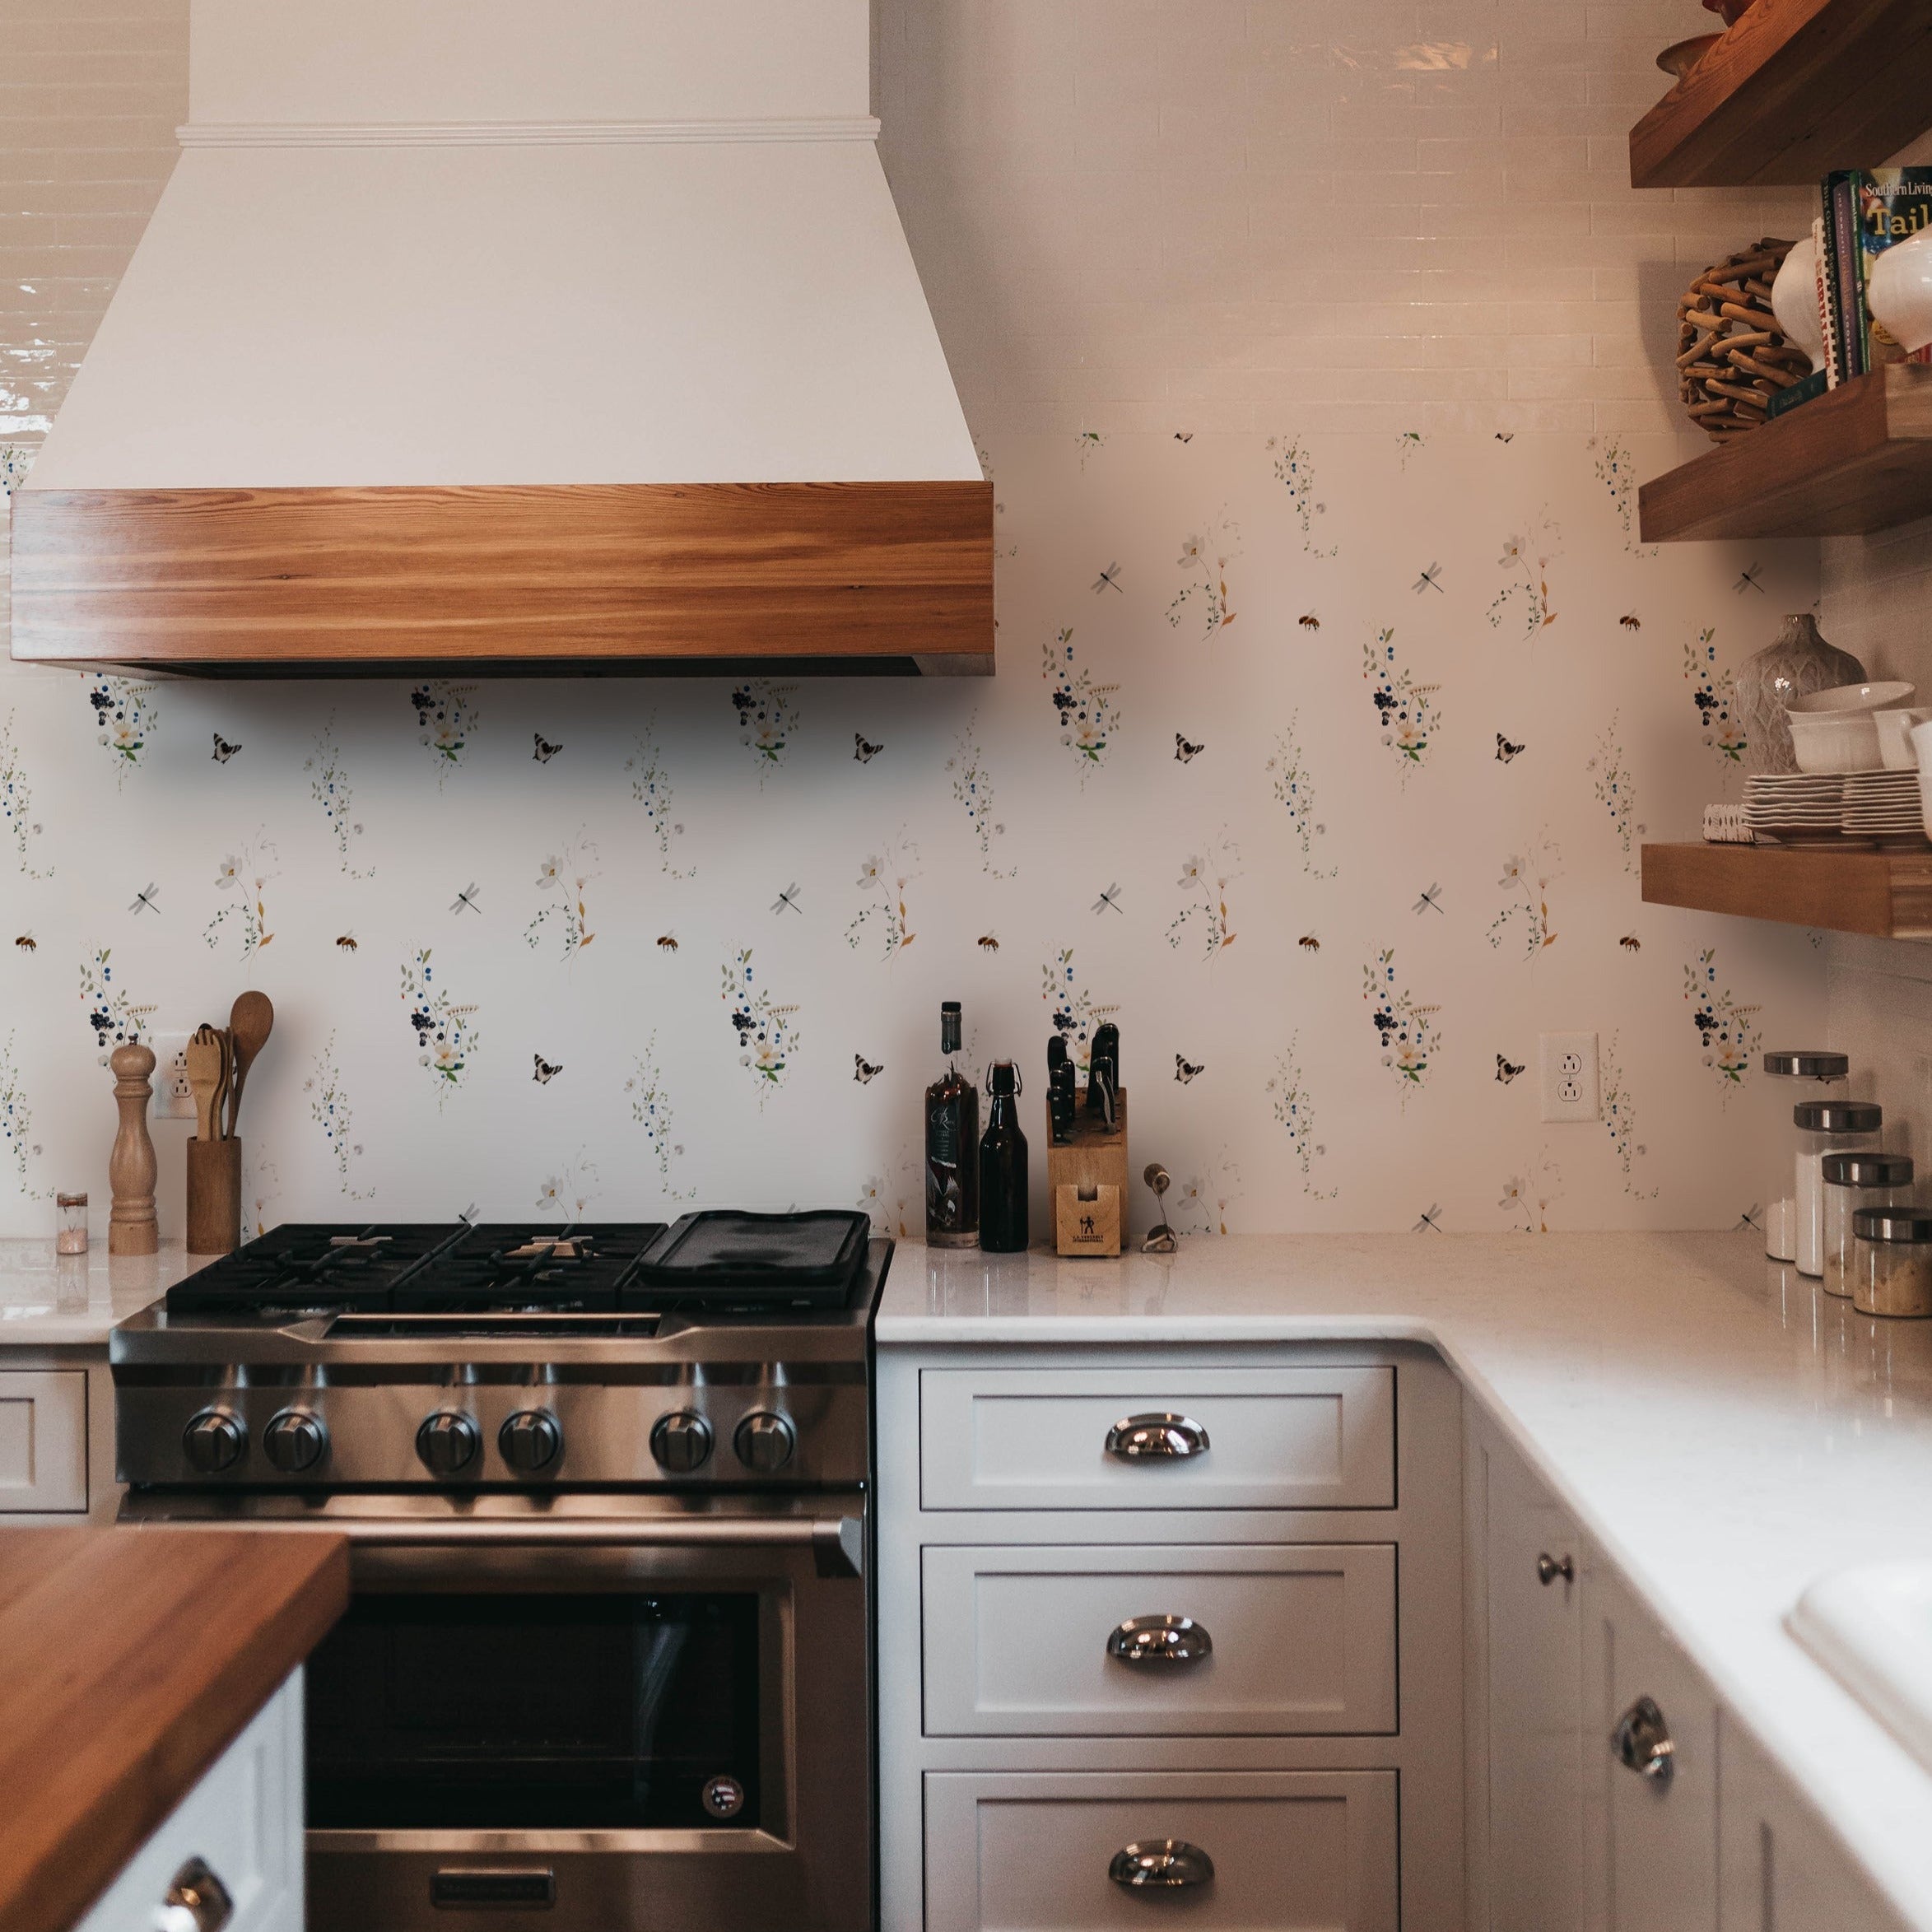 A modern kitchen setup with the "Berry Spring Wallpaper" providing a lively backdrop. The kitchen features sleek cabinetry and a professional-grade stove, with the playful and naturalistic wallpaper pattern adding a touch of whimsy and charm.